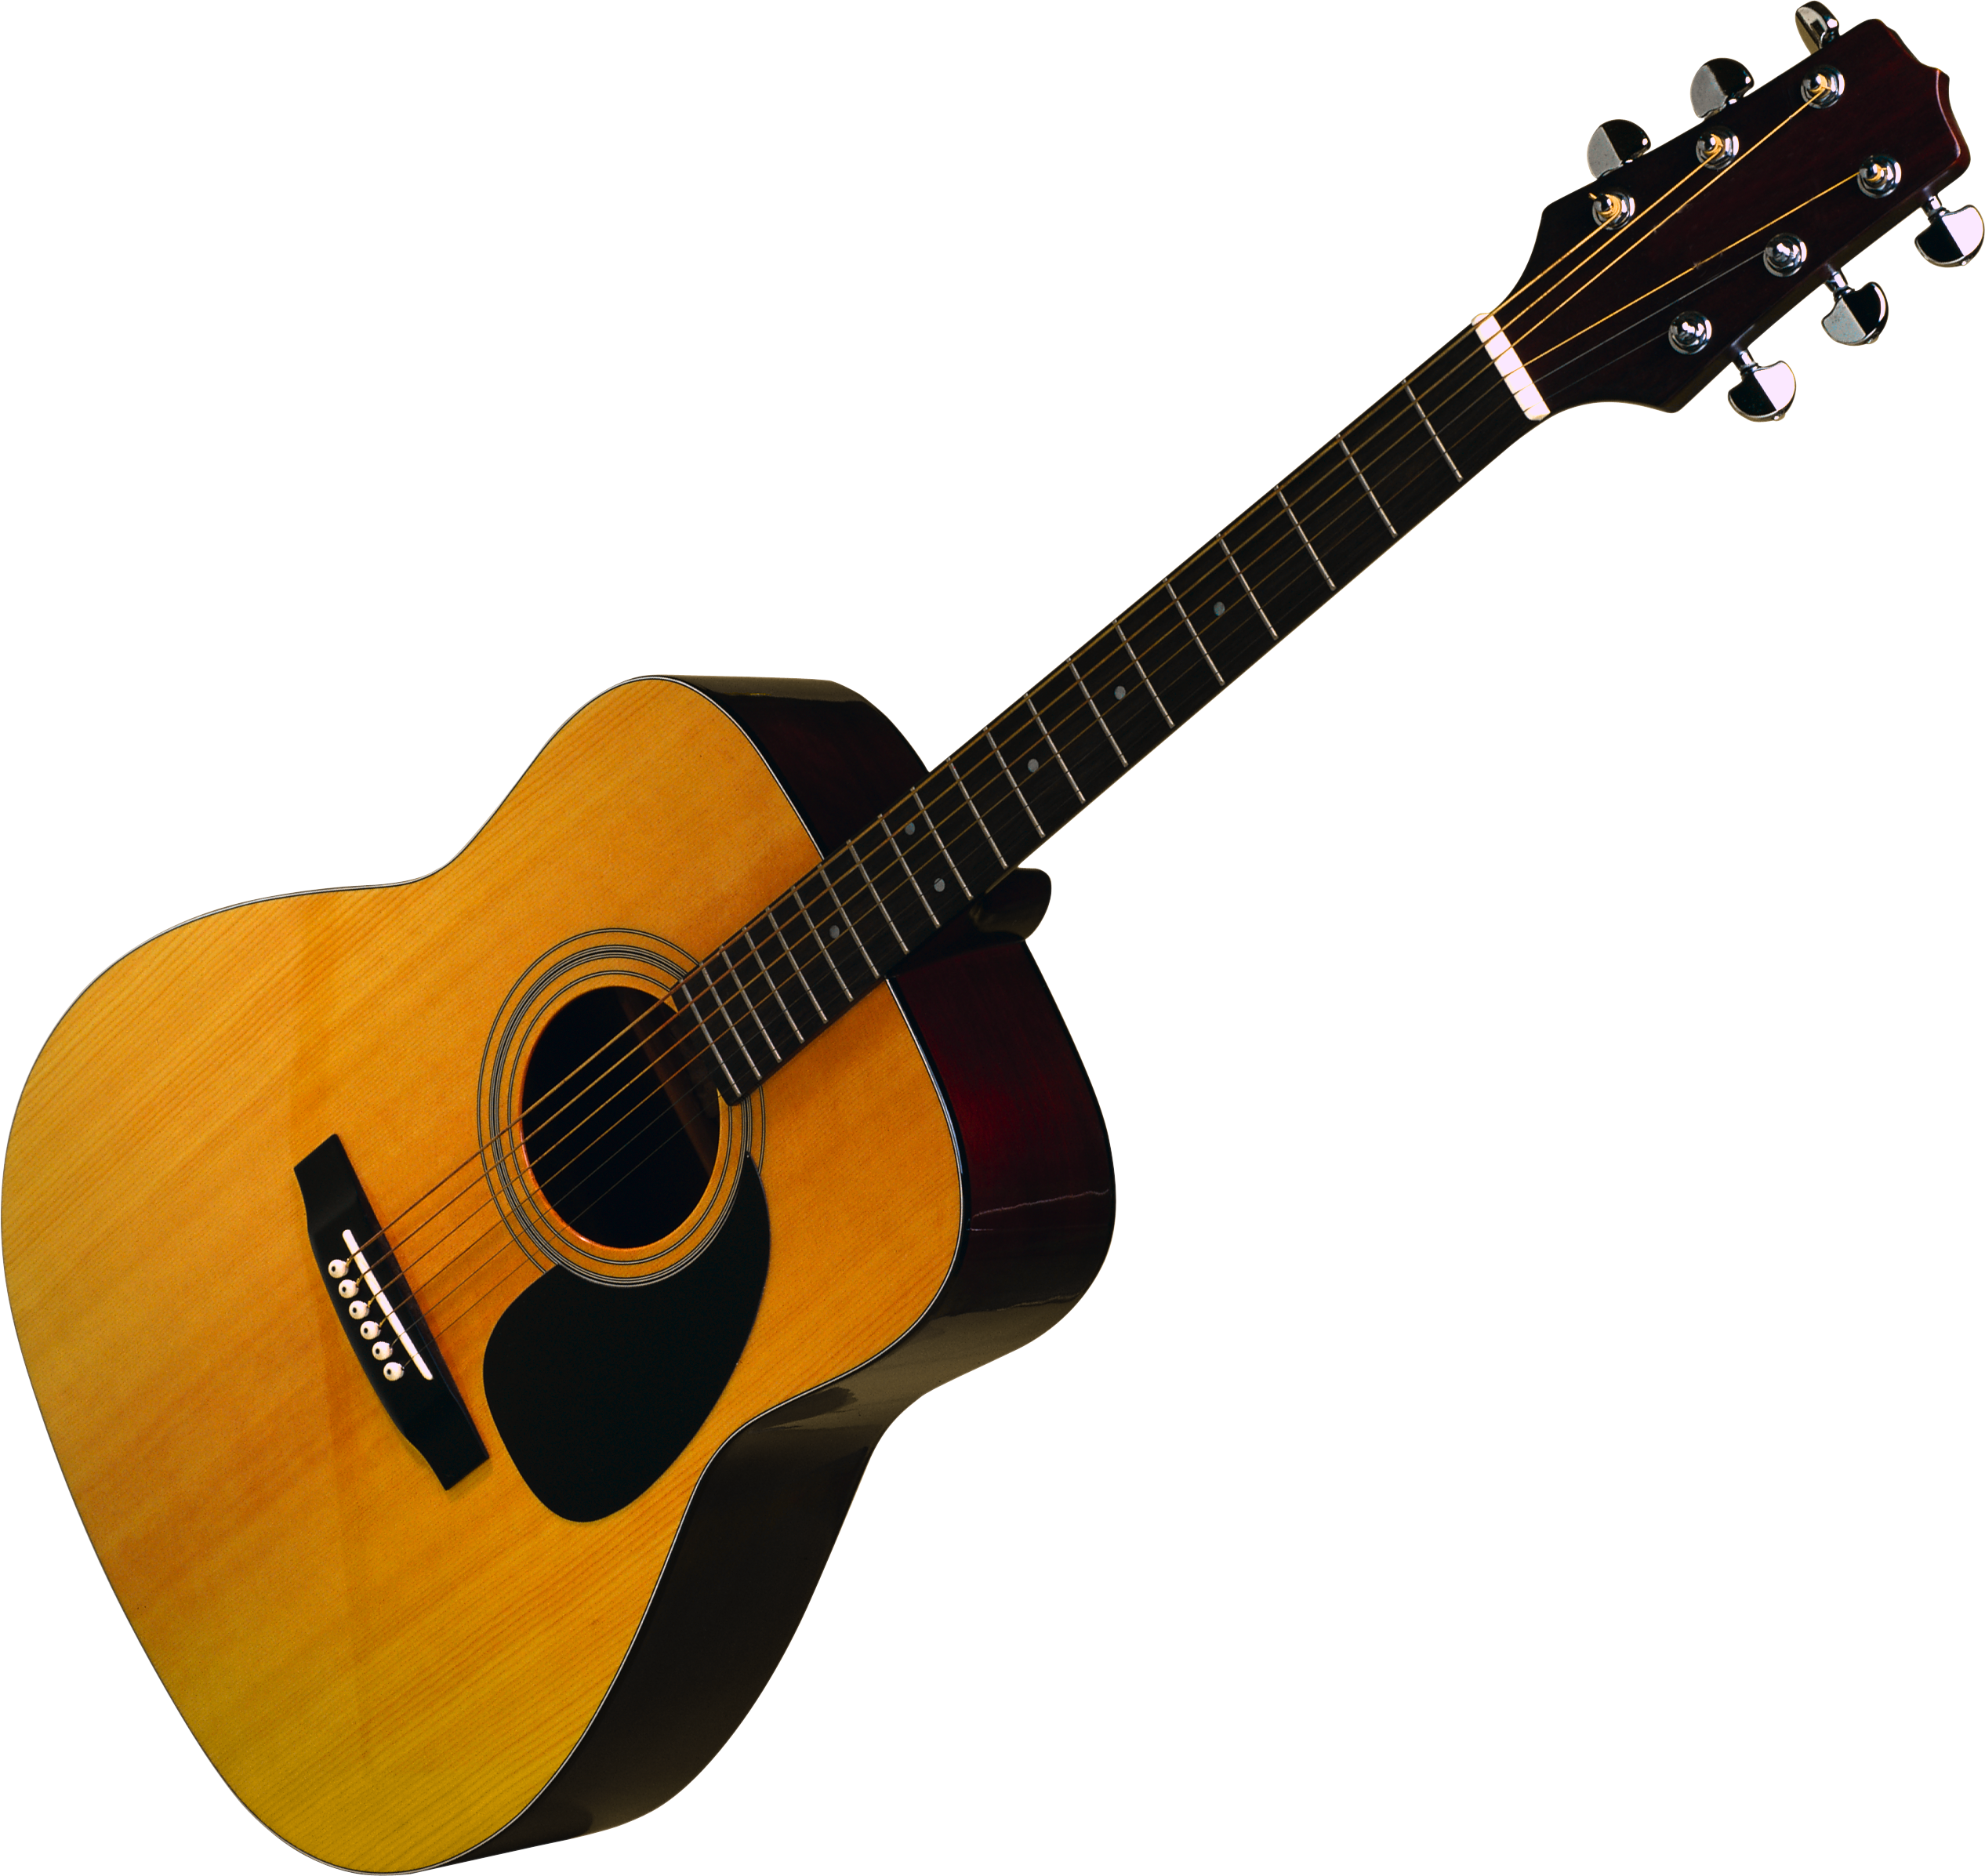 Acoustic Classic Guitar PNG Image